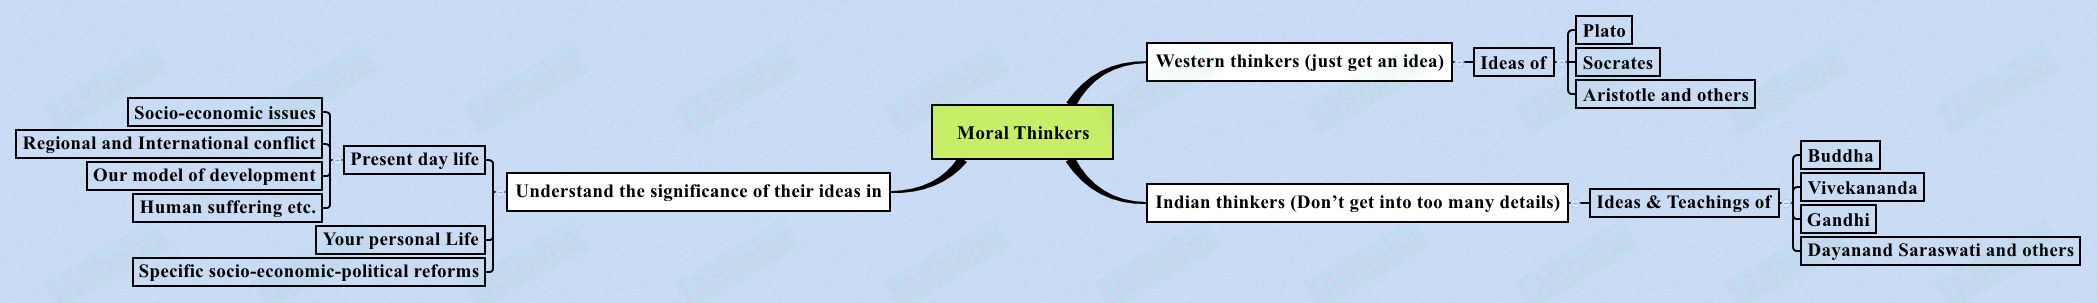 Moral-Thinkers